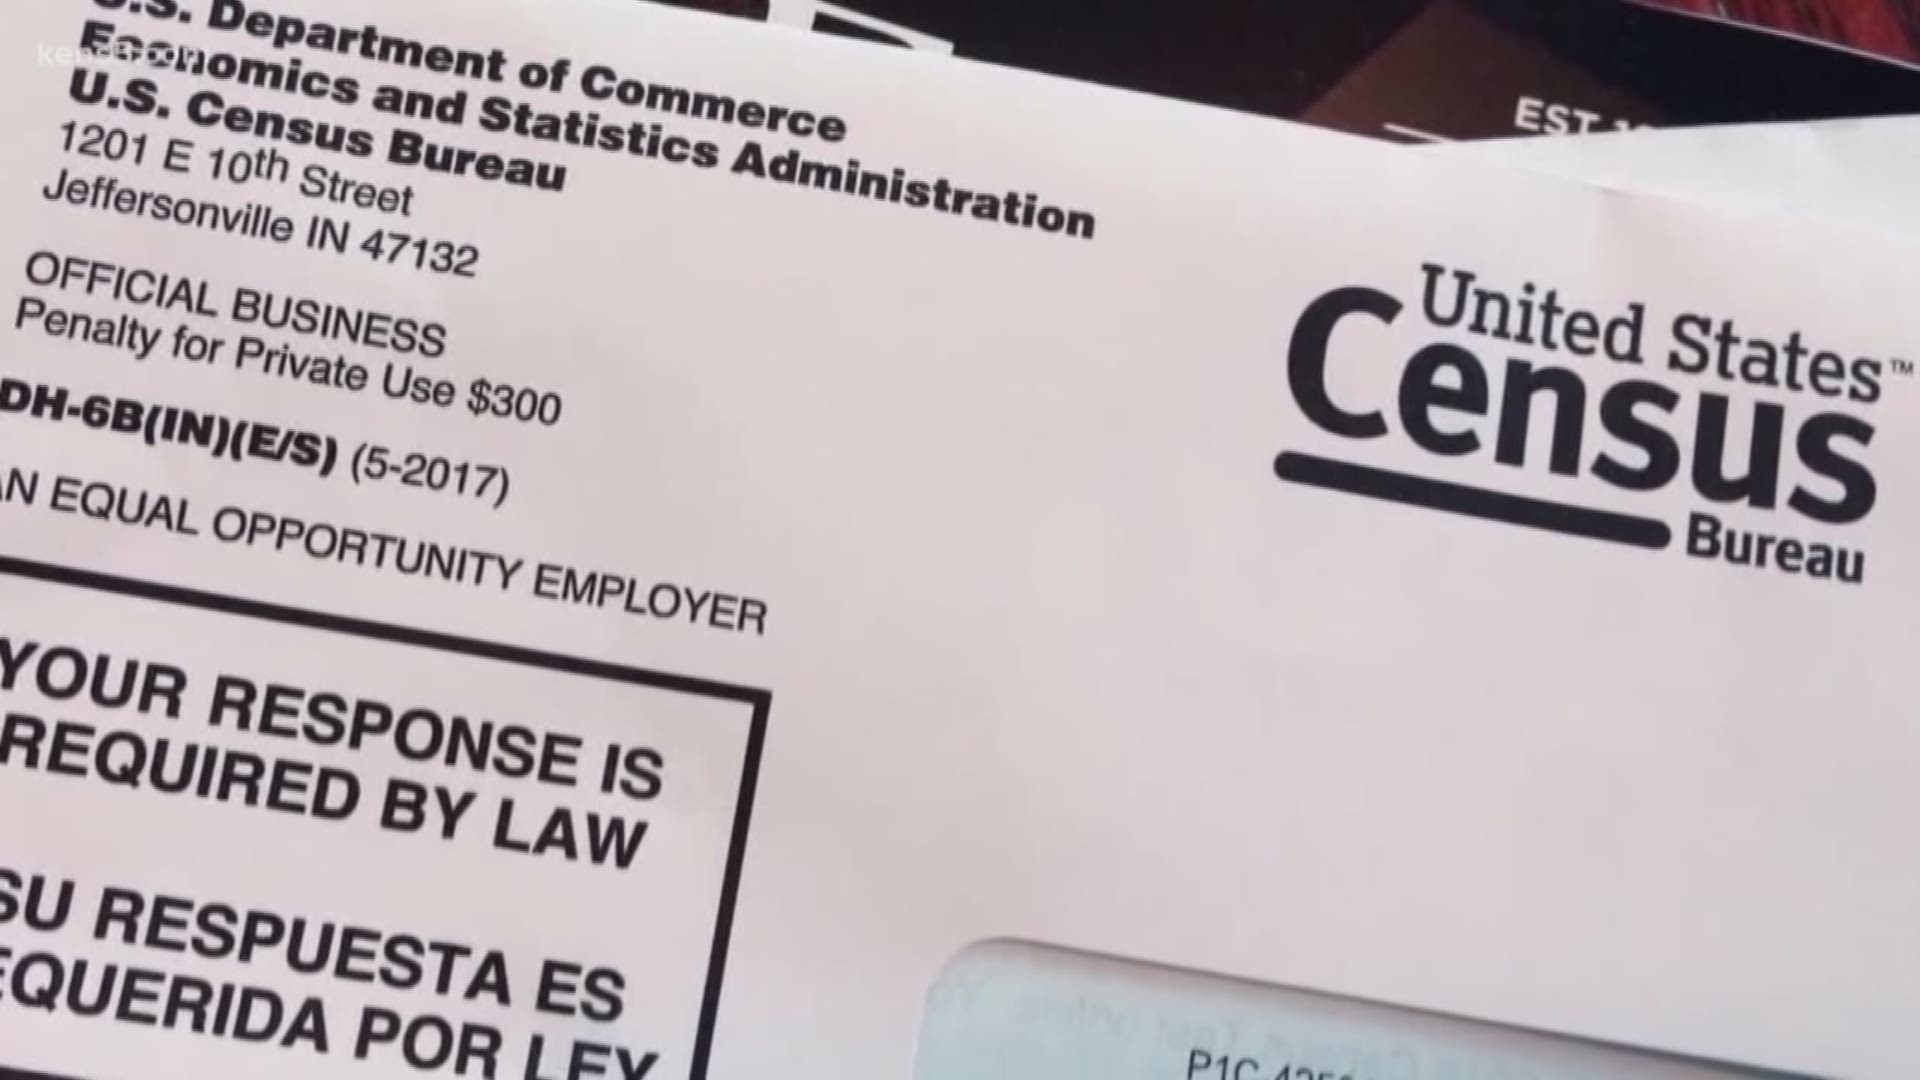 Looking for a job? Apply to work as a field worker collecting data for the 2020 census.